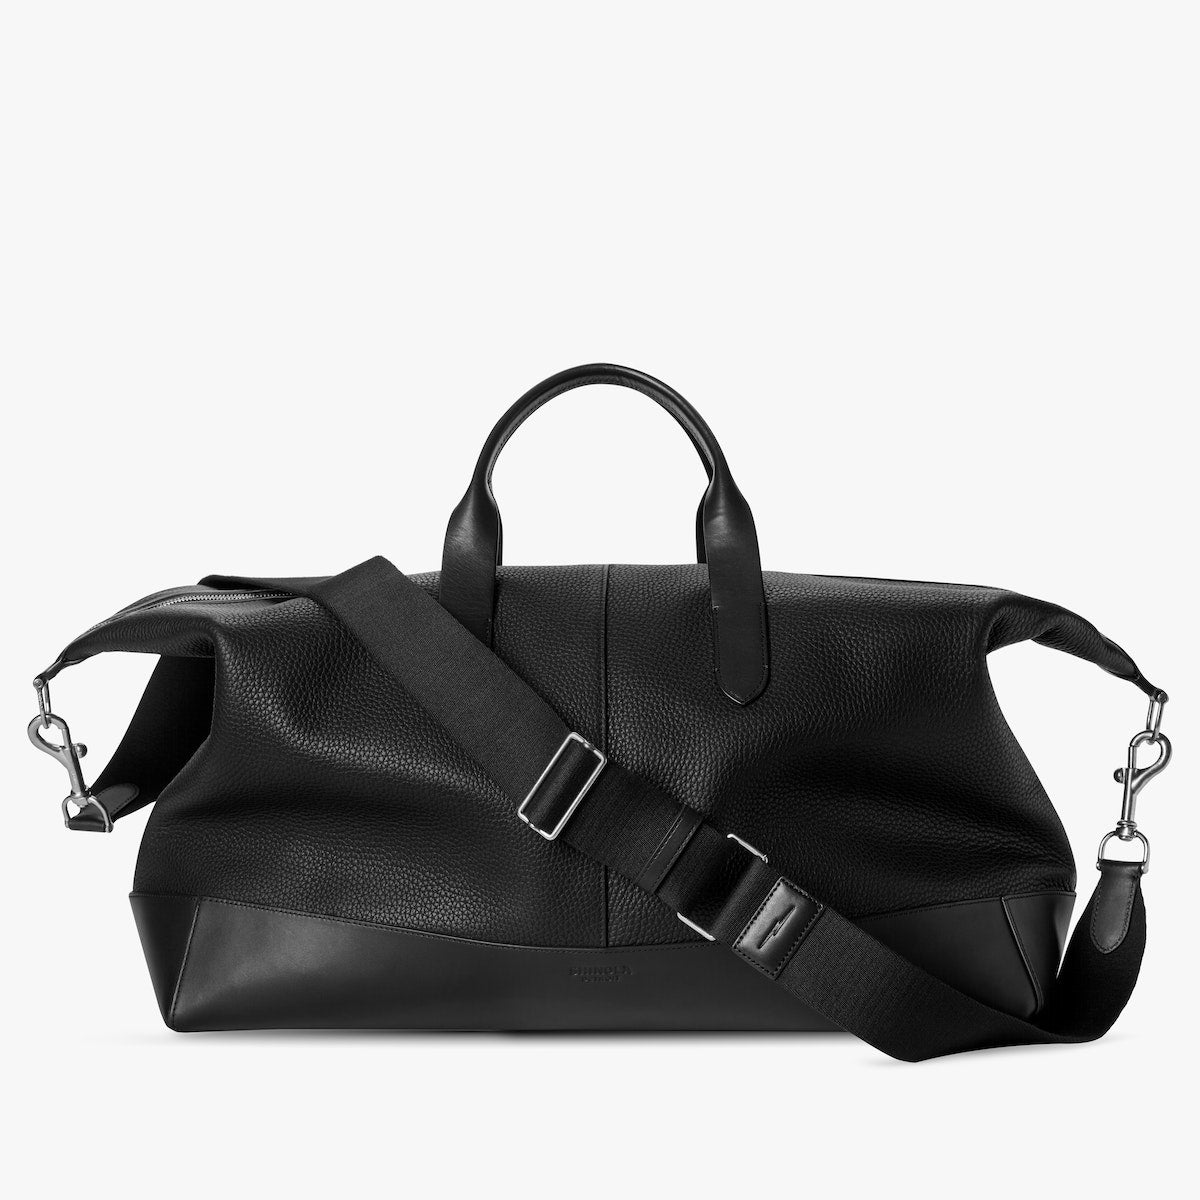 CANFIELD CLASSIC HOLDALL - NATURAL GRAIN LEATHER - BLACK